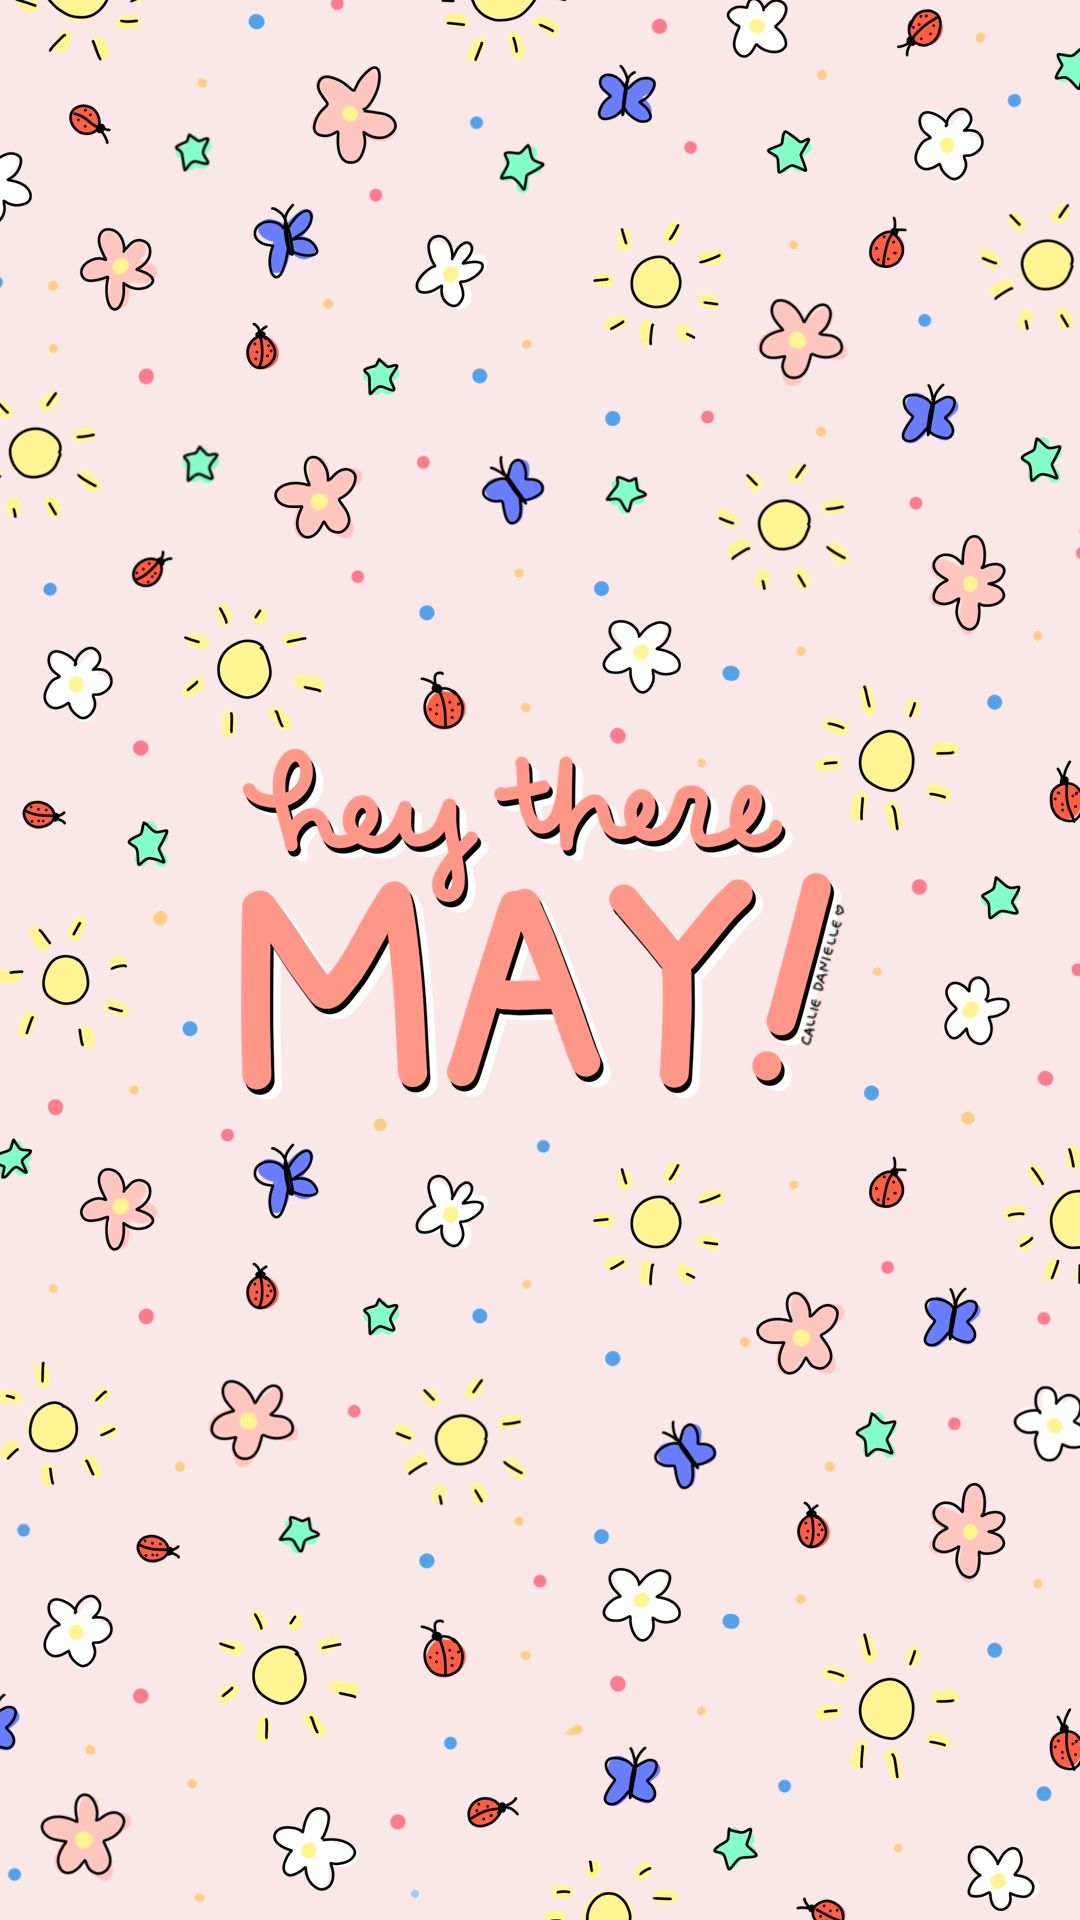 The may calendar with flowers and text - May